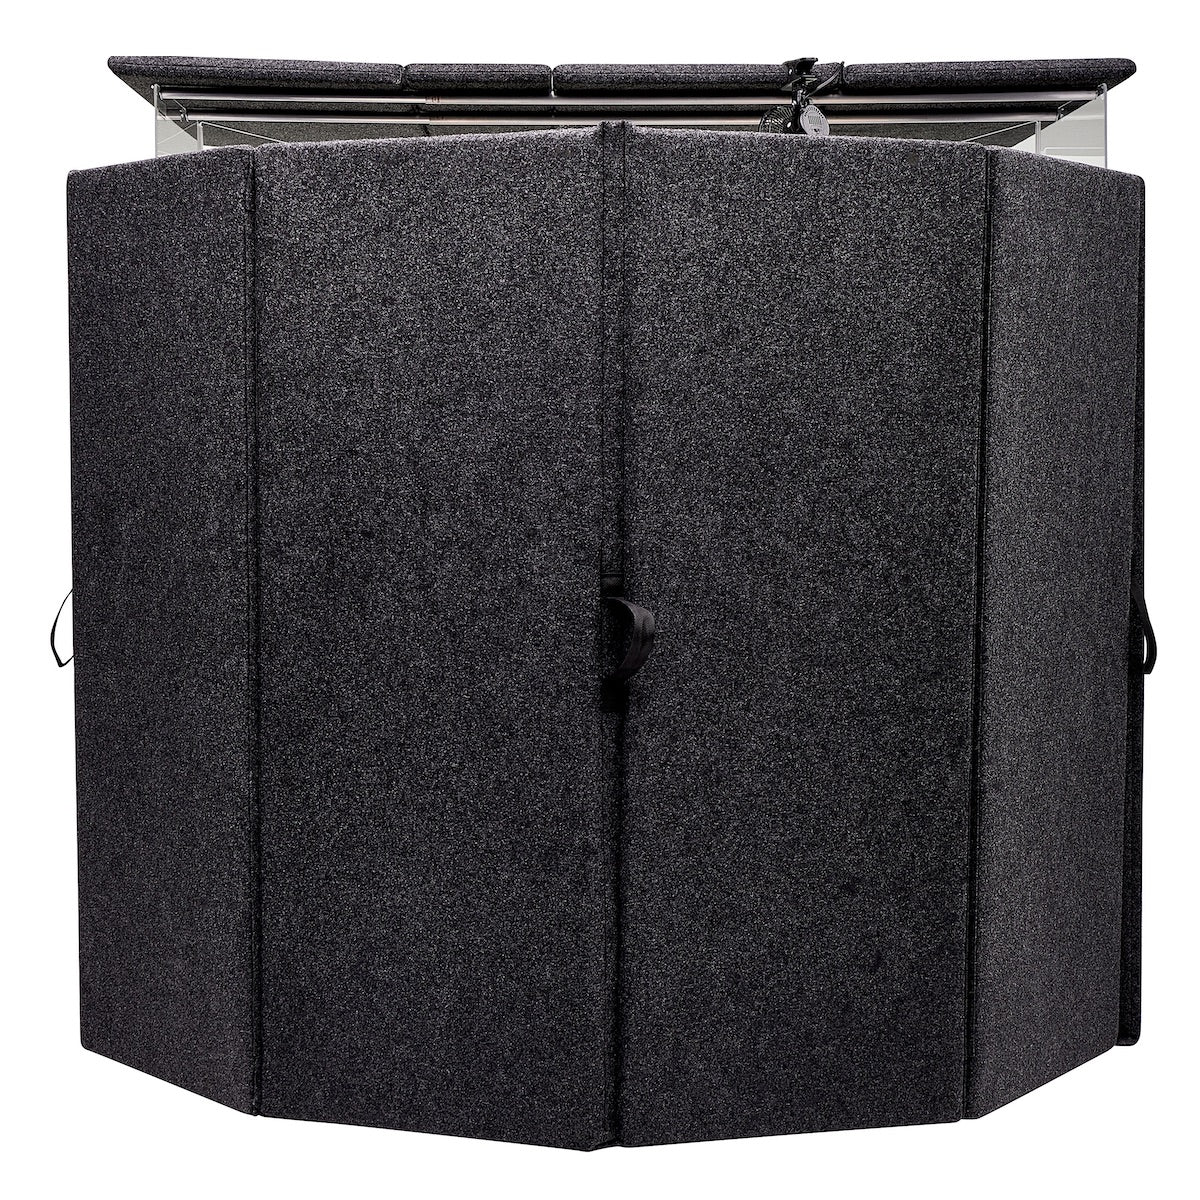 ClearSonic IPA - IsoPac A Drum Isolation Booth, rear